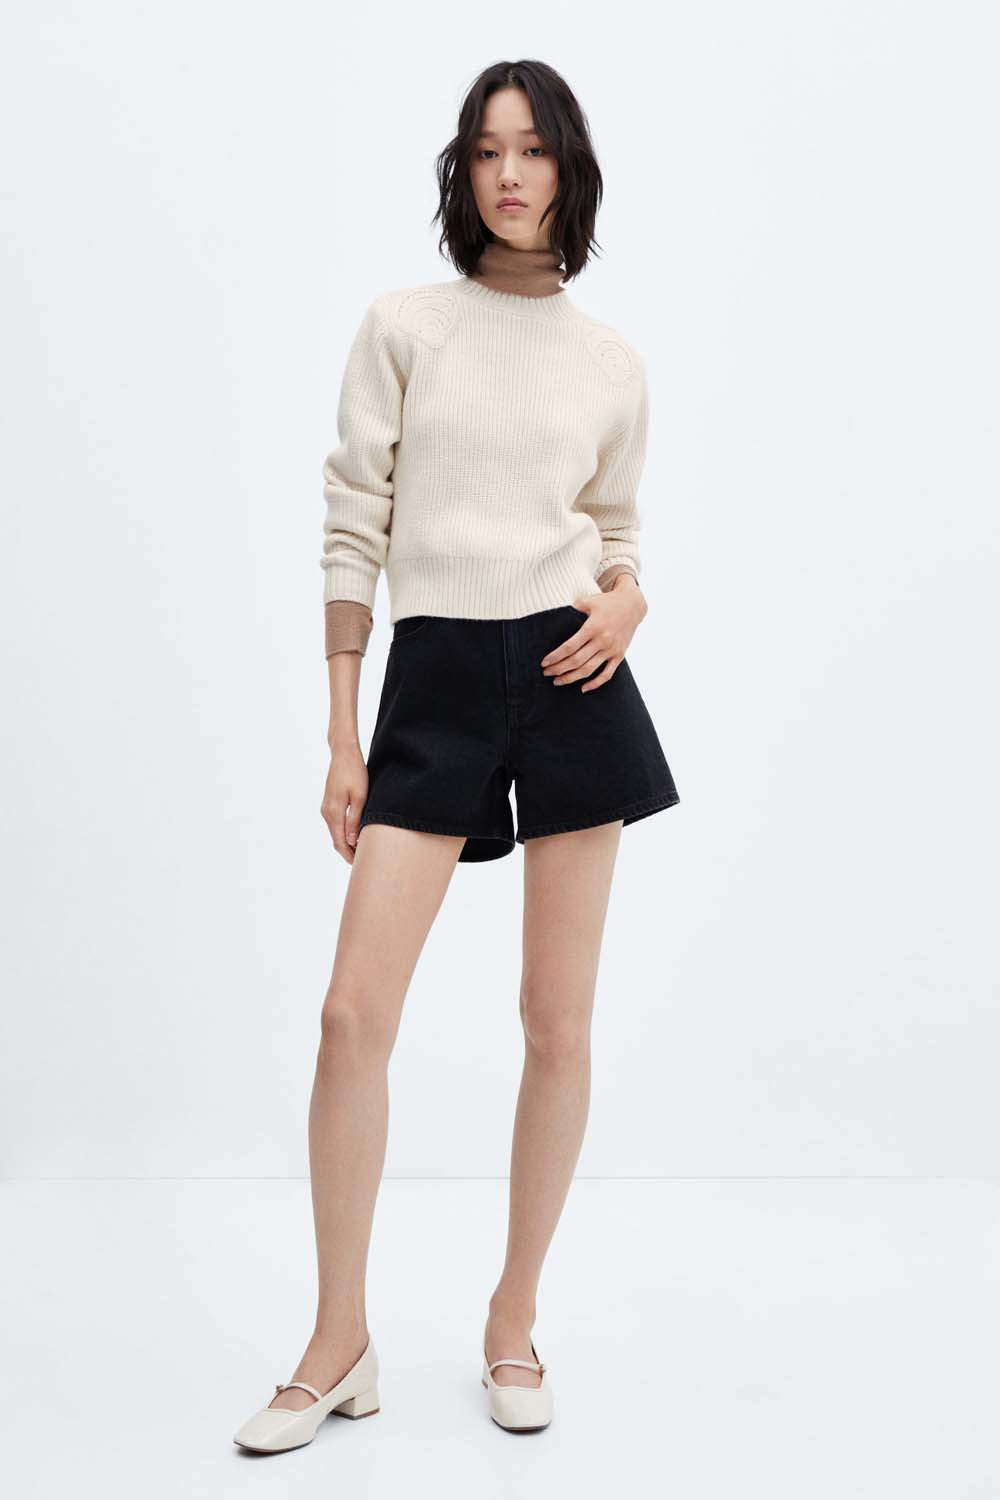 Mango Perkins neck sweater with shoulder detail 5 Shaws Department Stores